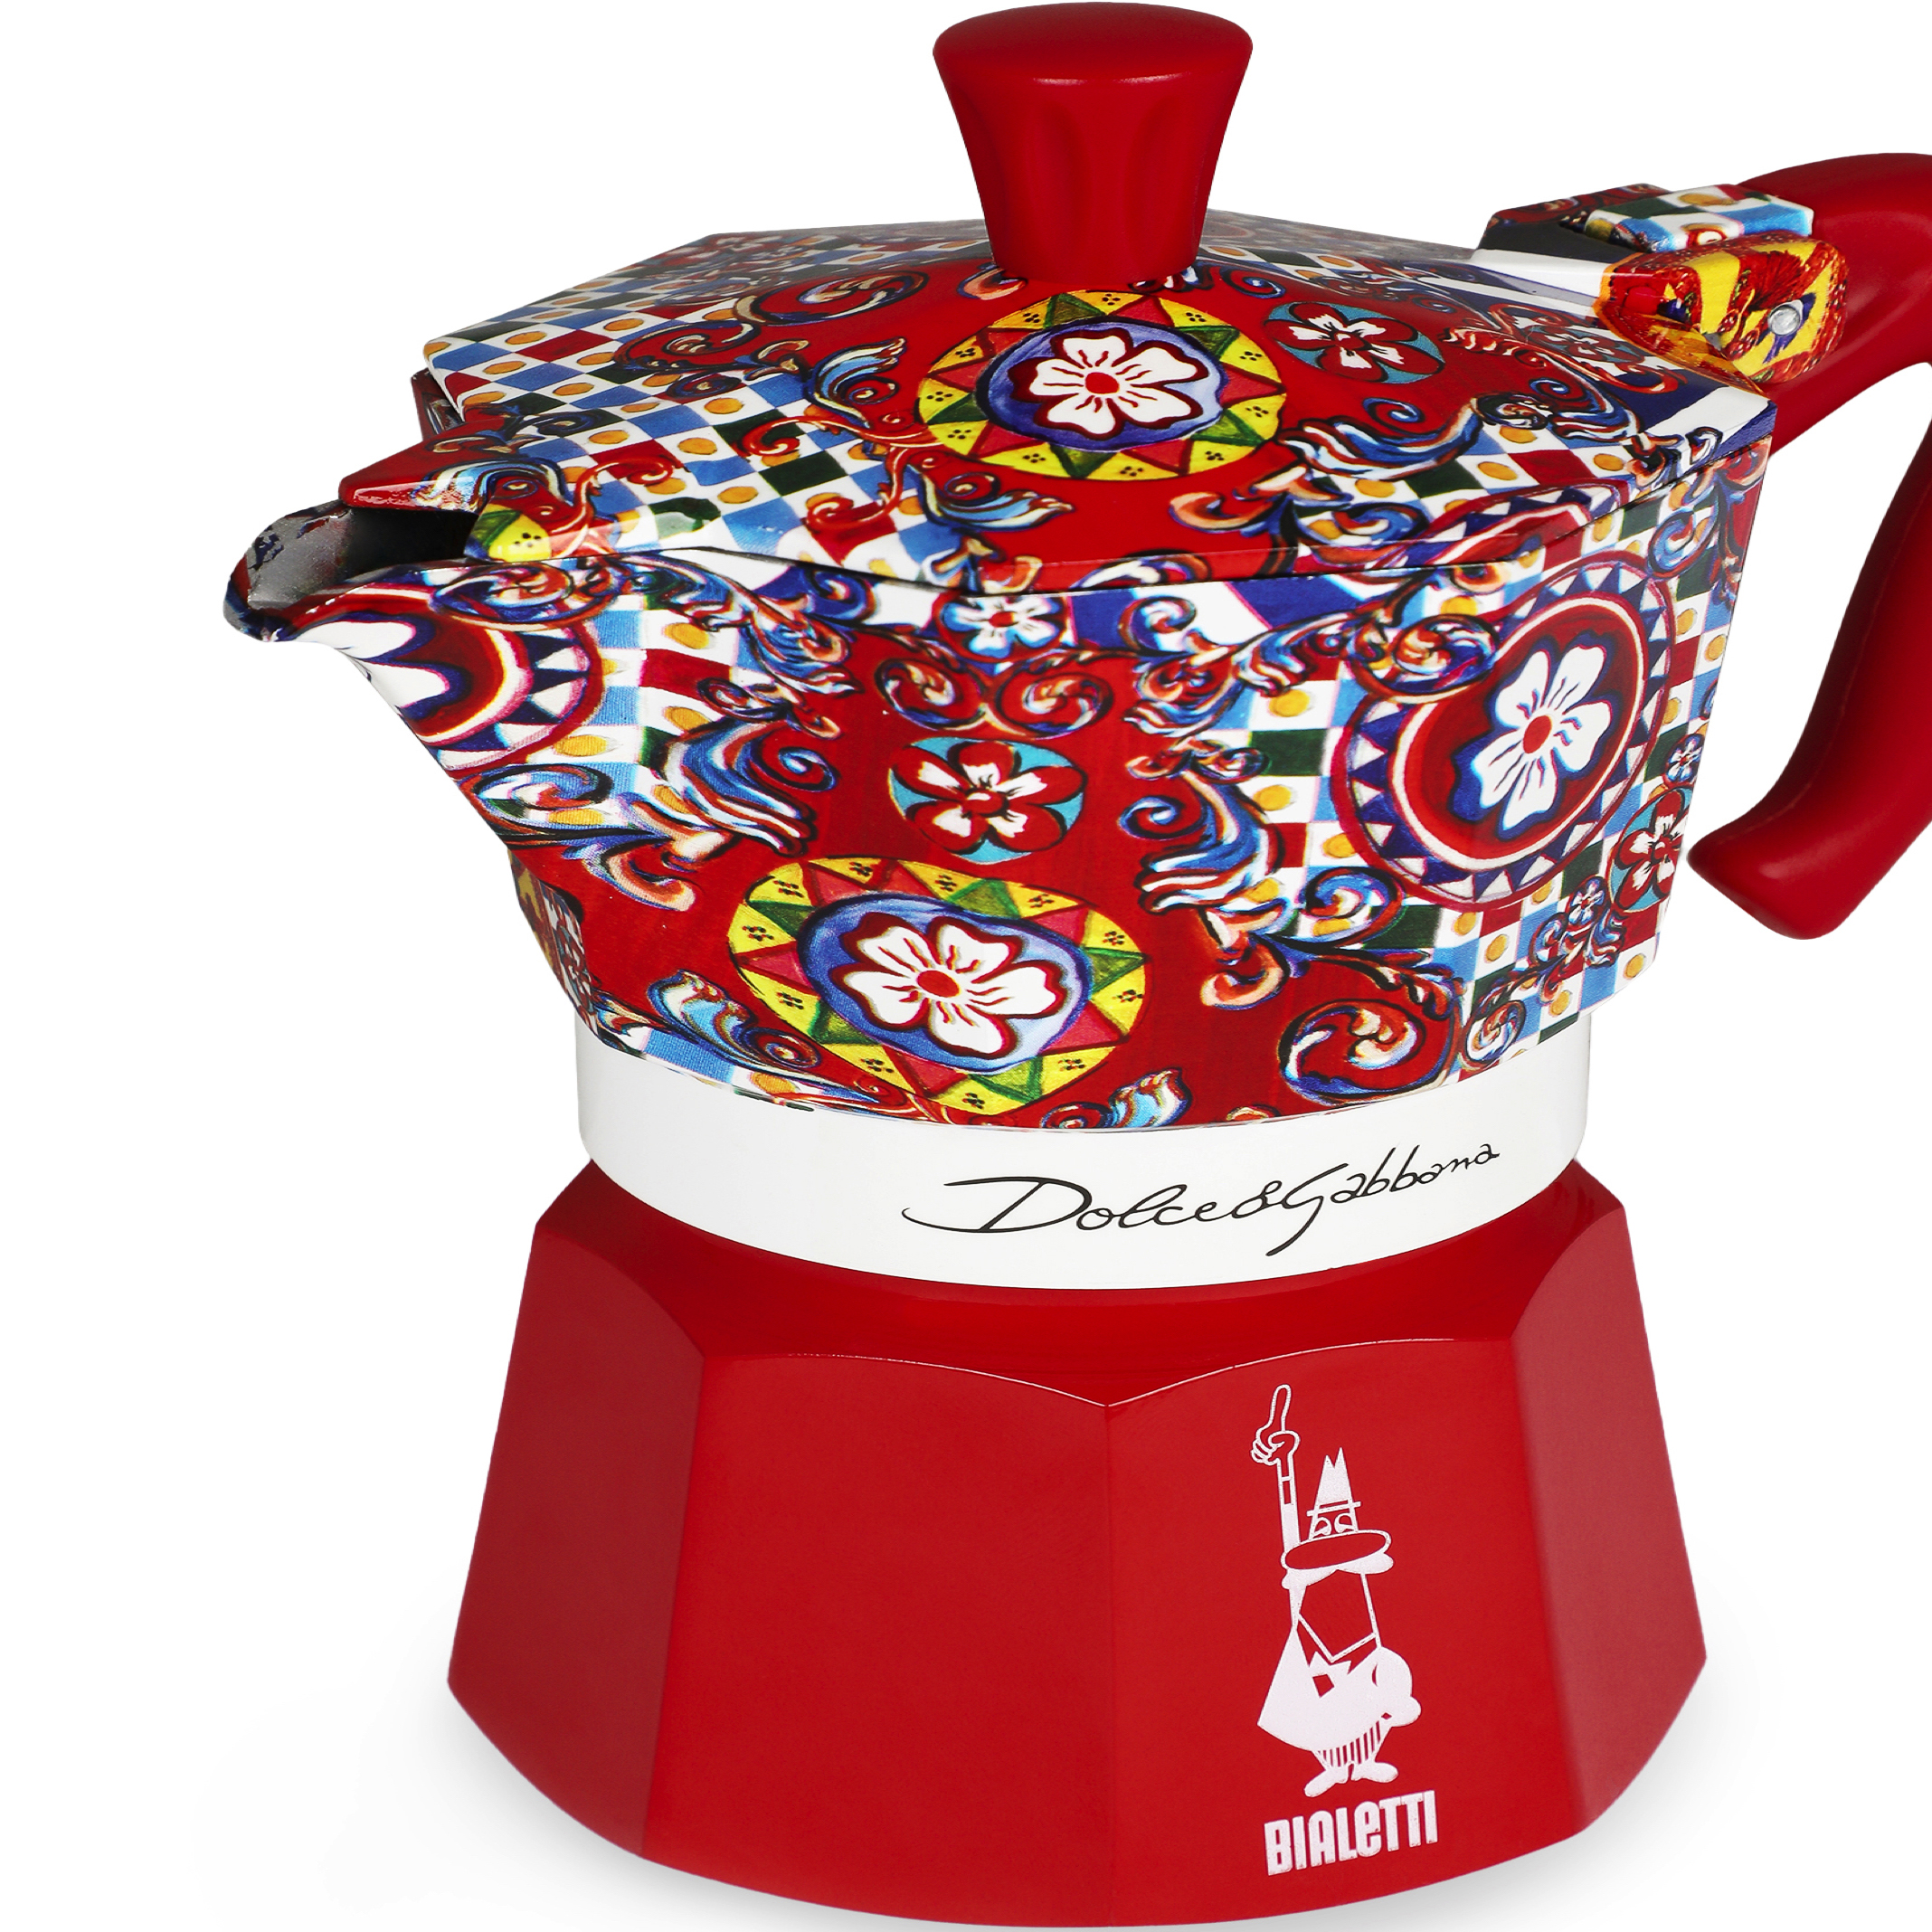 Buy Bialetti products? Order online! 